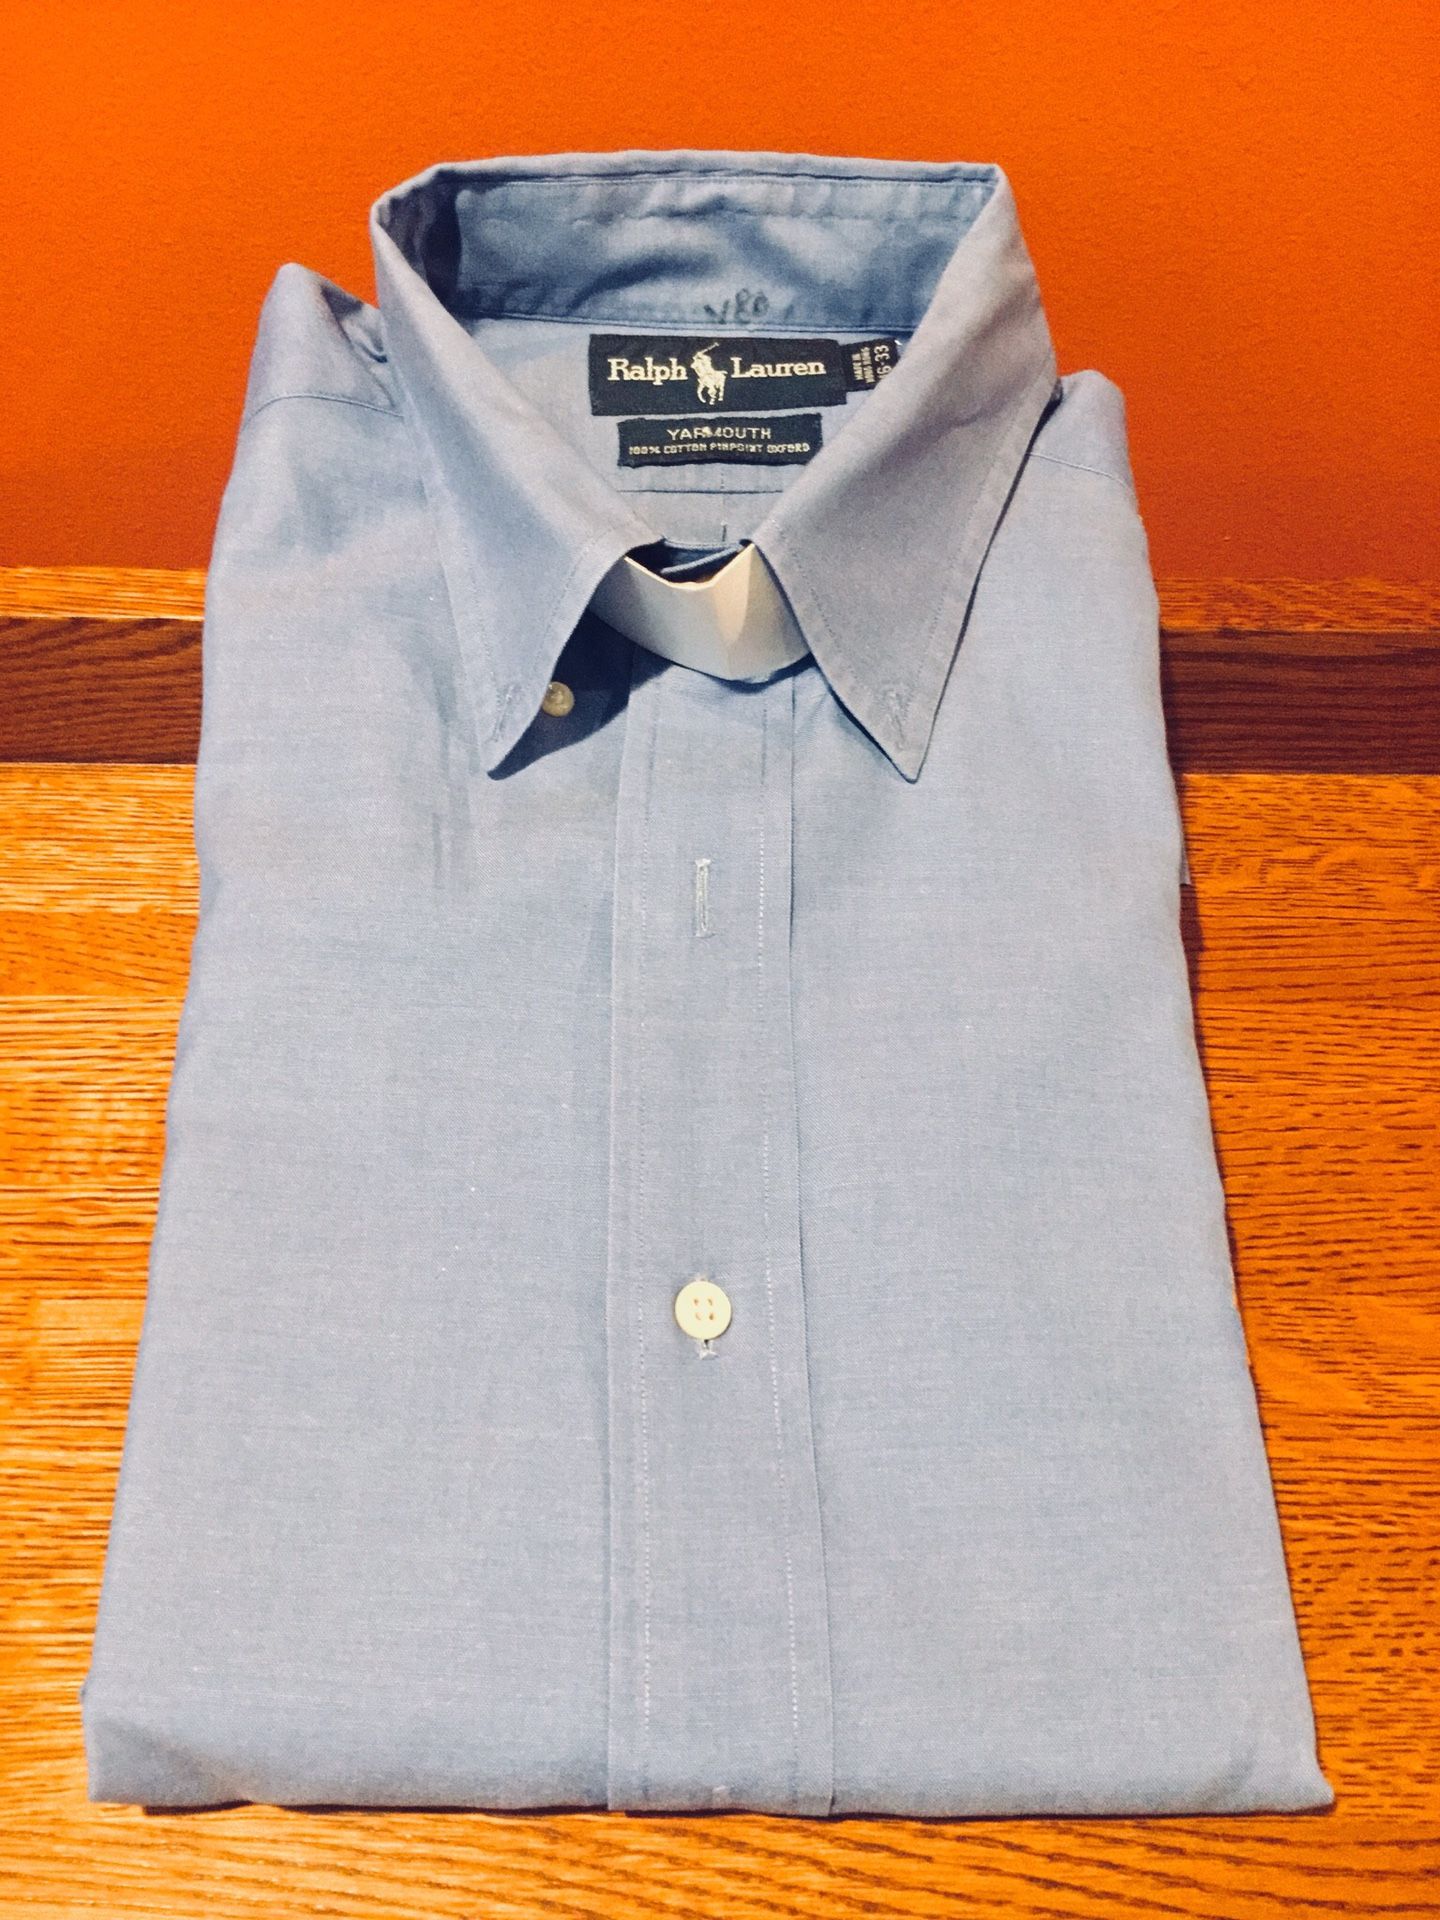 RALPH LAUREN YARMOUTH PINPOINT OXFORD Men’s Luxury Cotton Long Sleeve Button Down Casual Dress Shirt - SHIPPING AVAILABLE